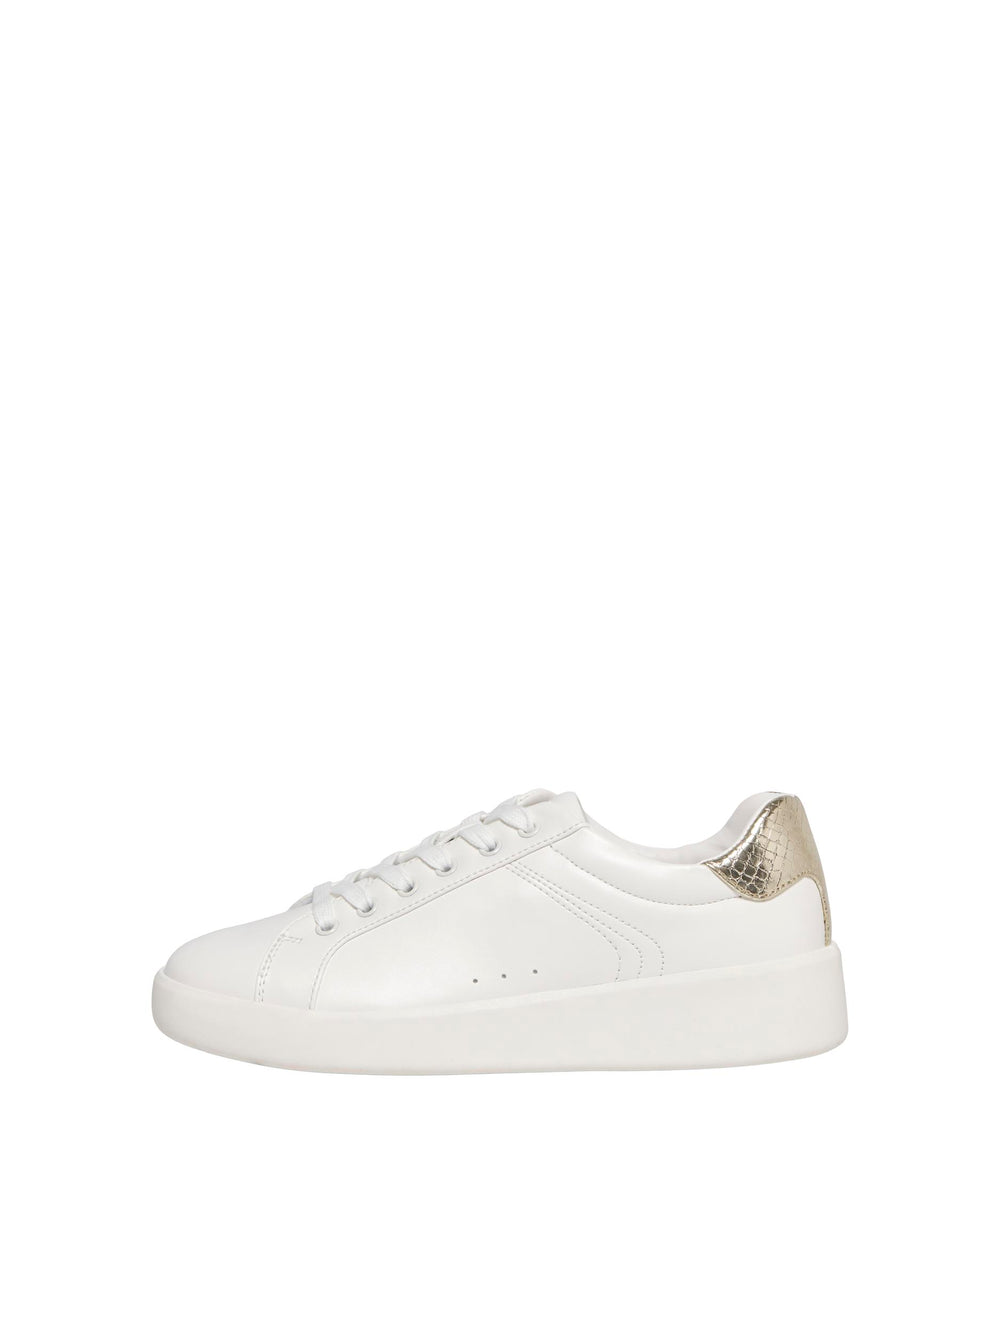 Soul Faux Leather Trainer - White/Gold